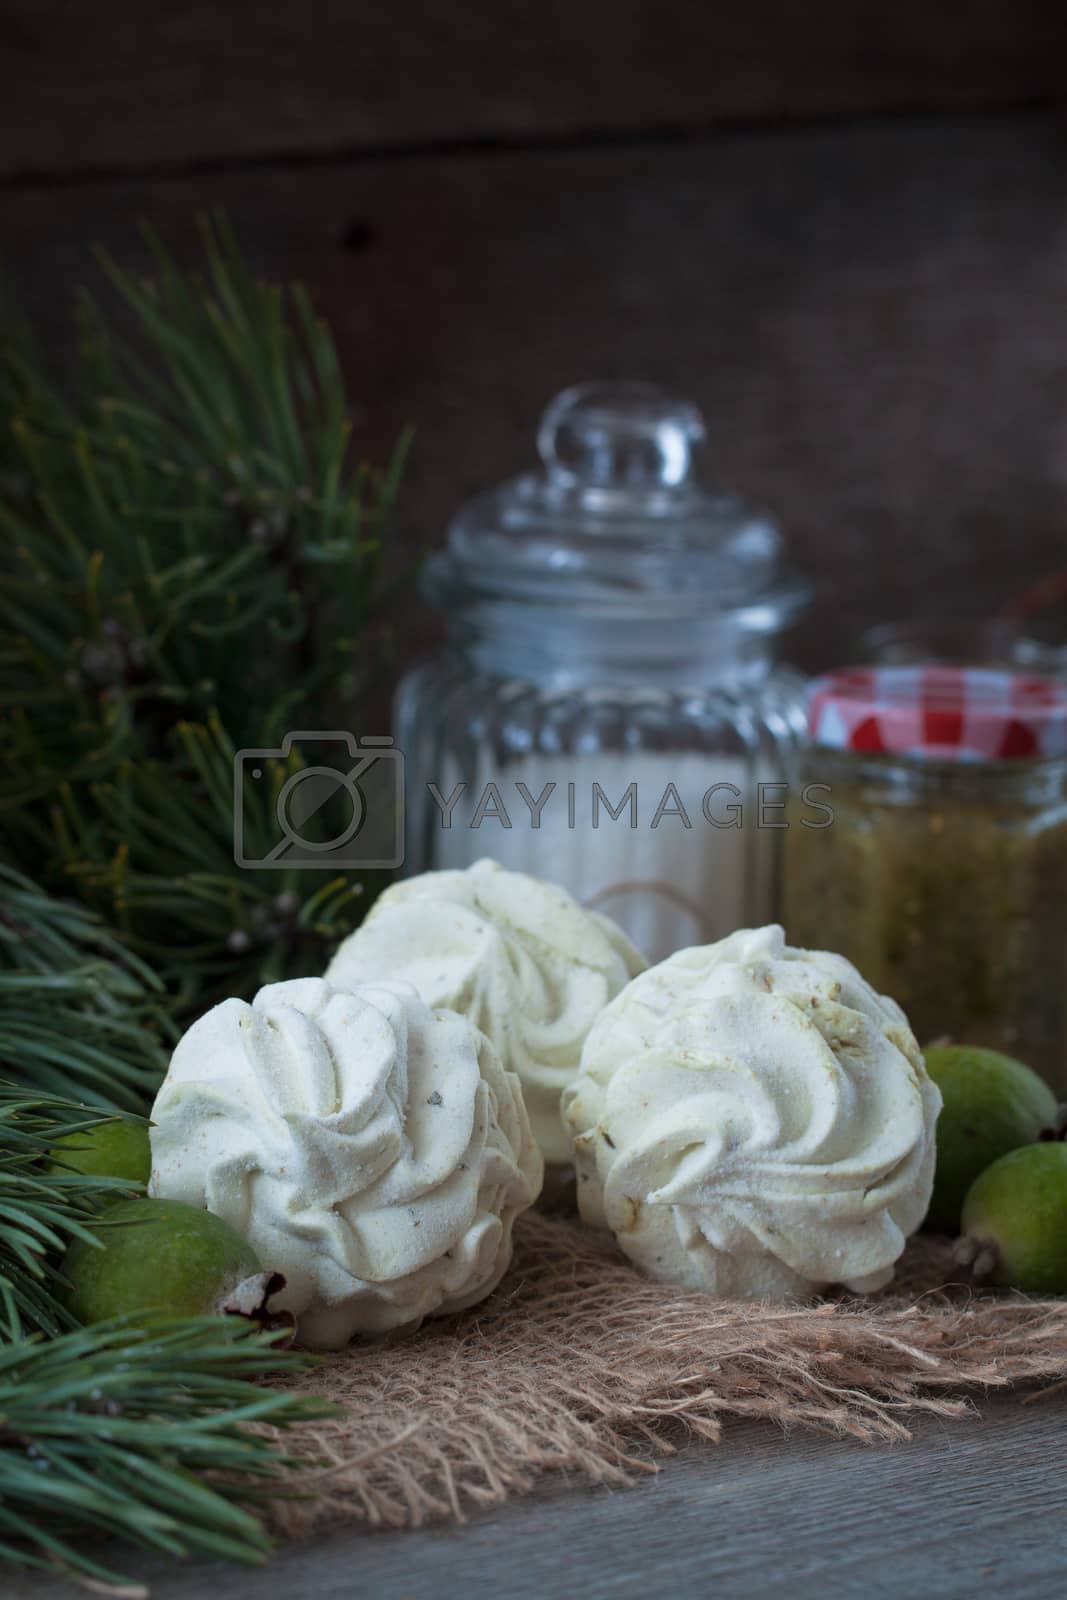 Royalty free image of Winter feijoa tasted zephyr or marsmallows on the wooden background by Katia1504